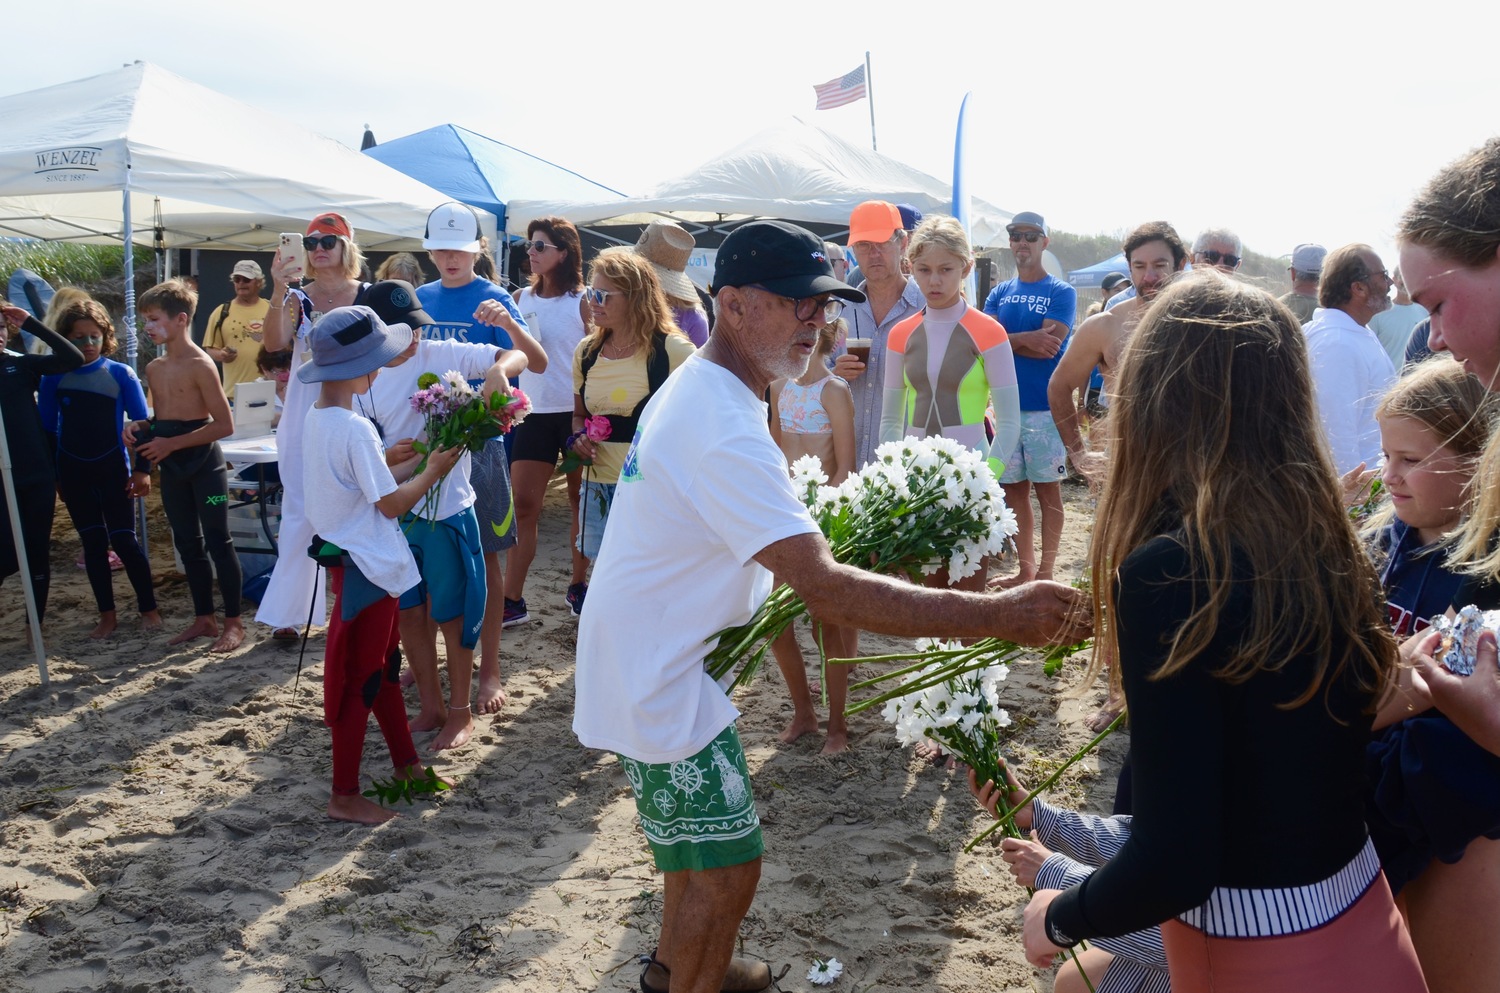 Roger Feit, co-founder and co-director, hands out flowers to those in attendance for 